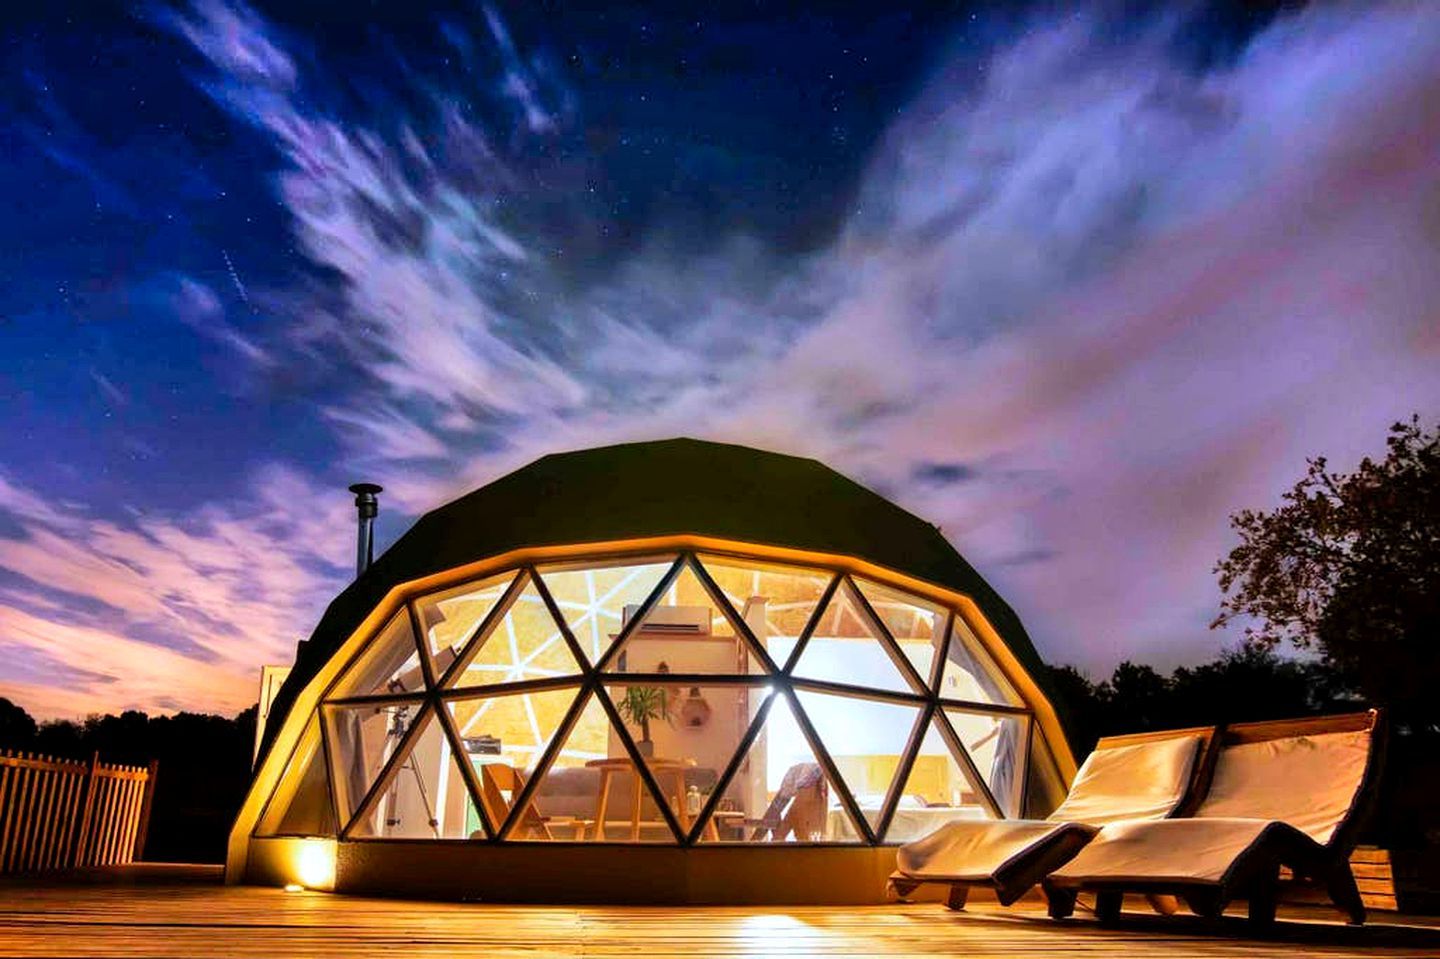 domo domos - company specialized in domes and geodesic structures